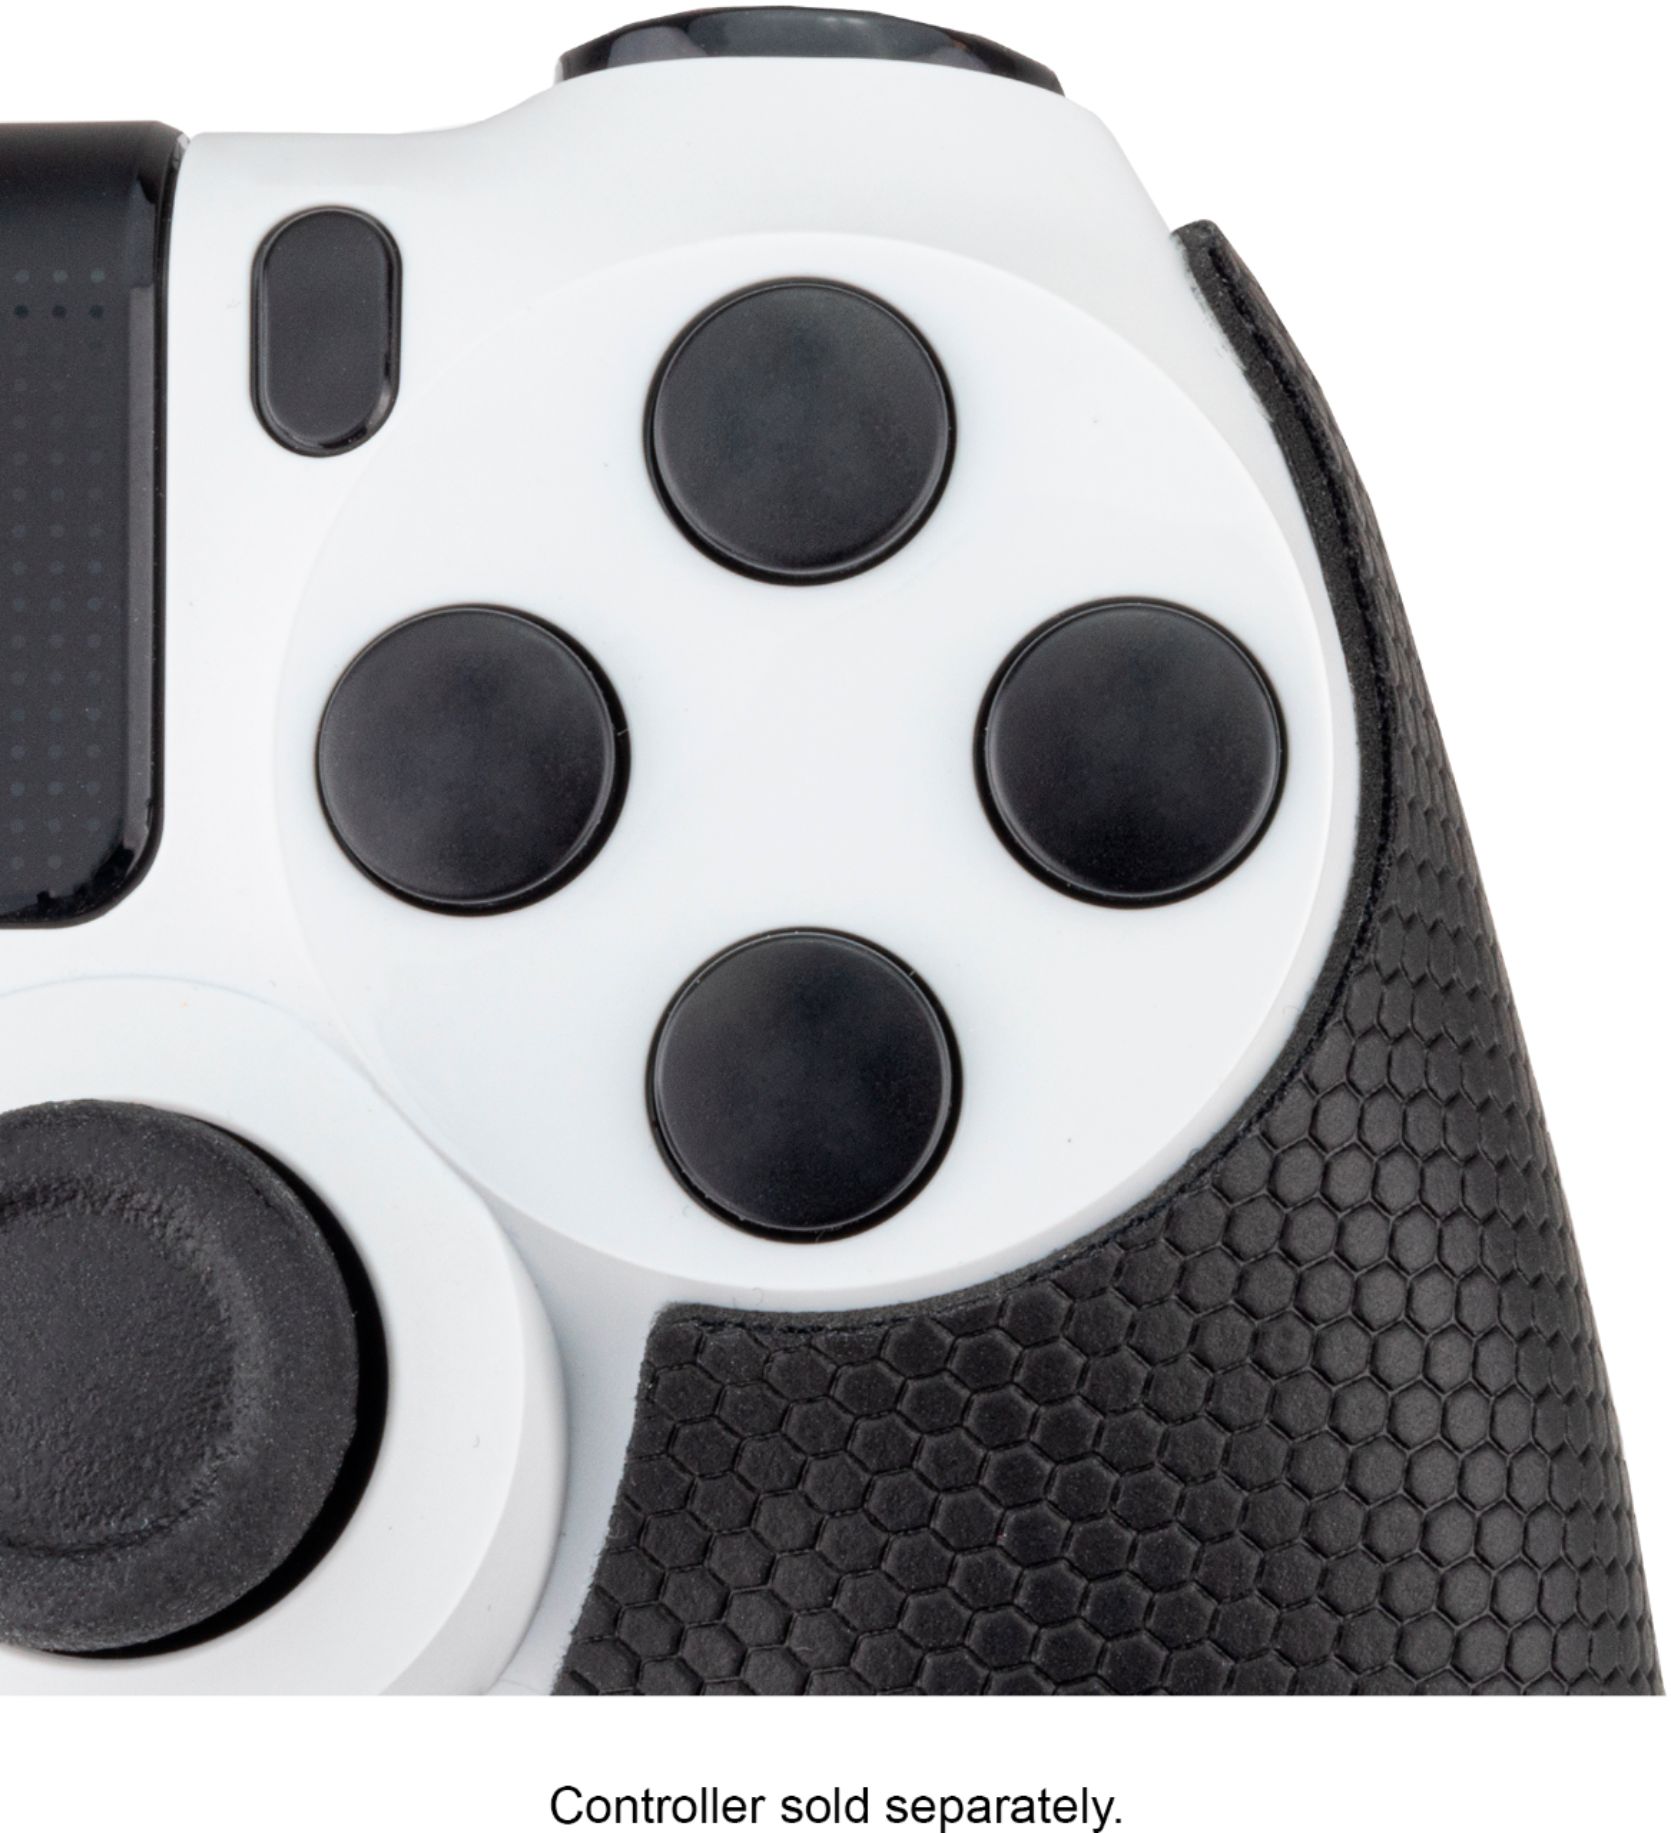 performance grips ps4